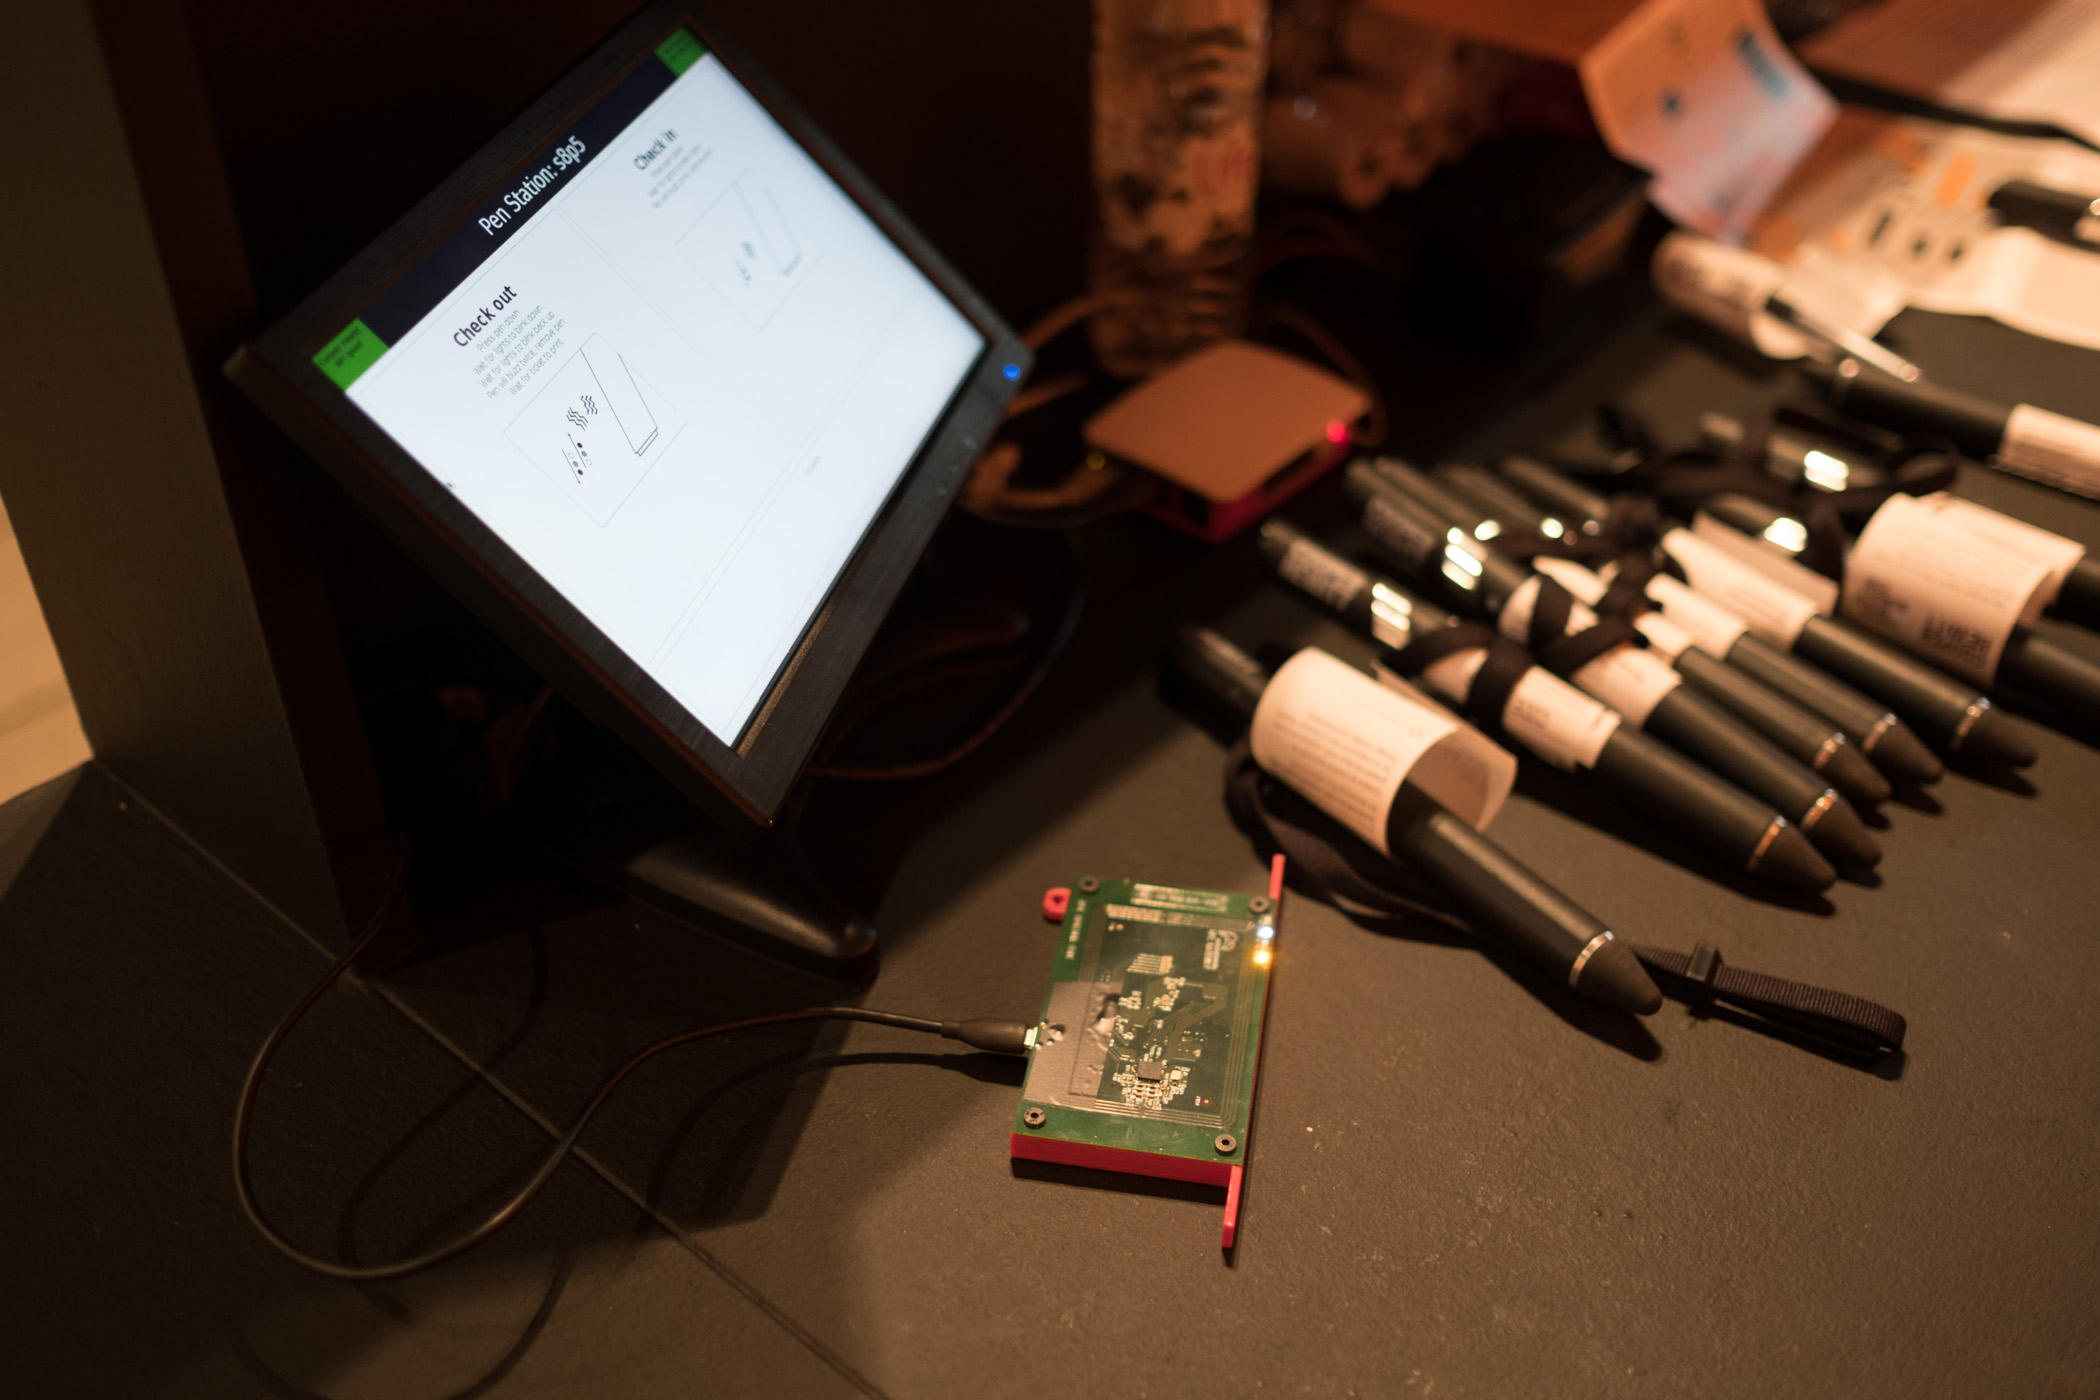 Dan's Raspberry Pi powered Pen registration and ticket printing station.